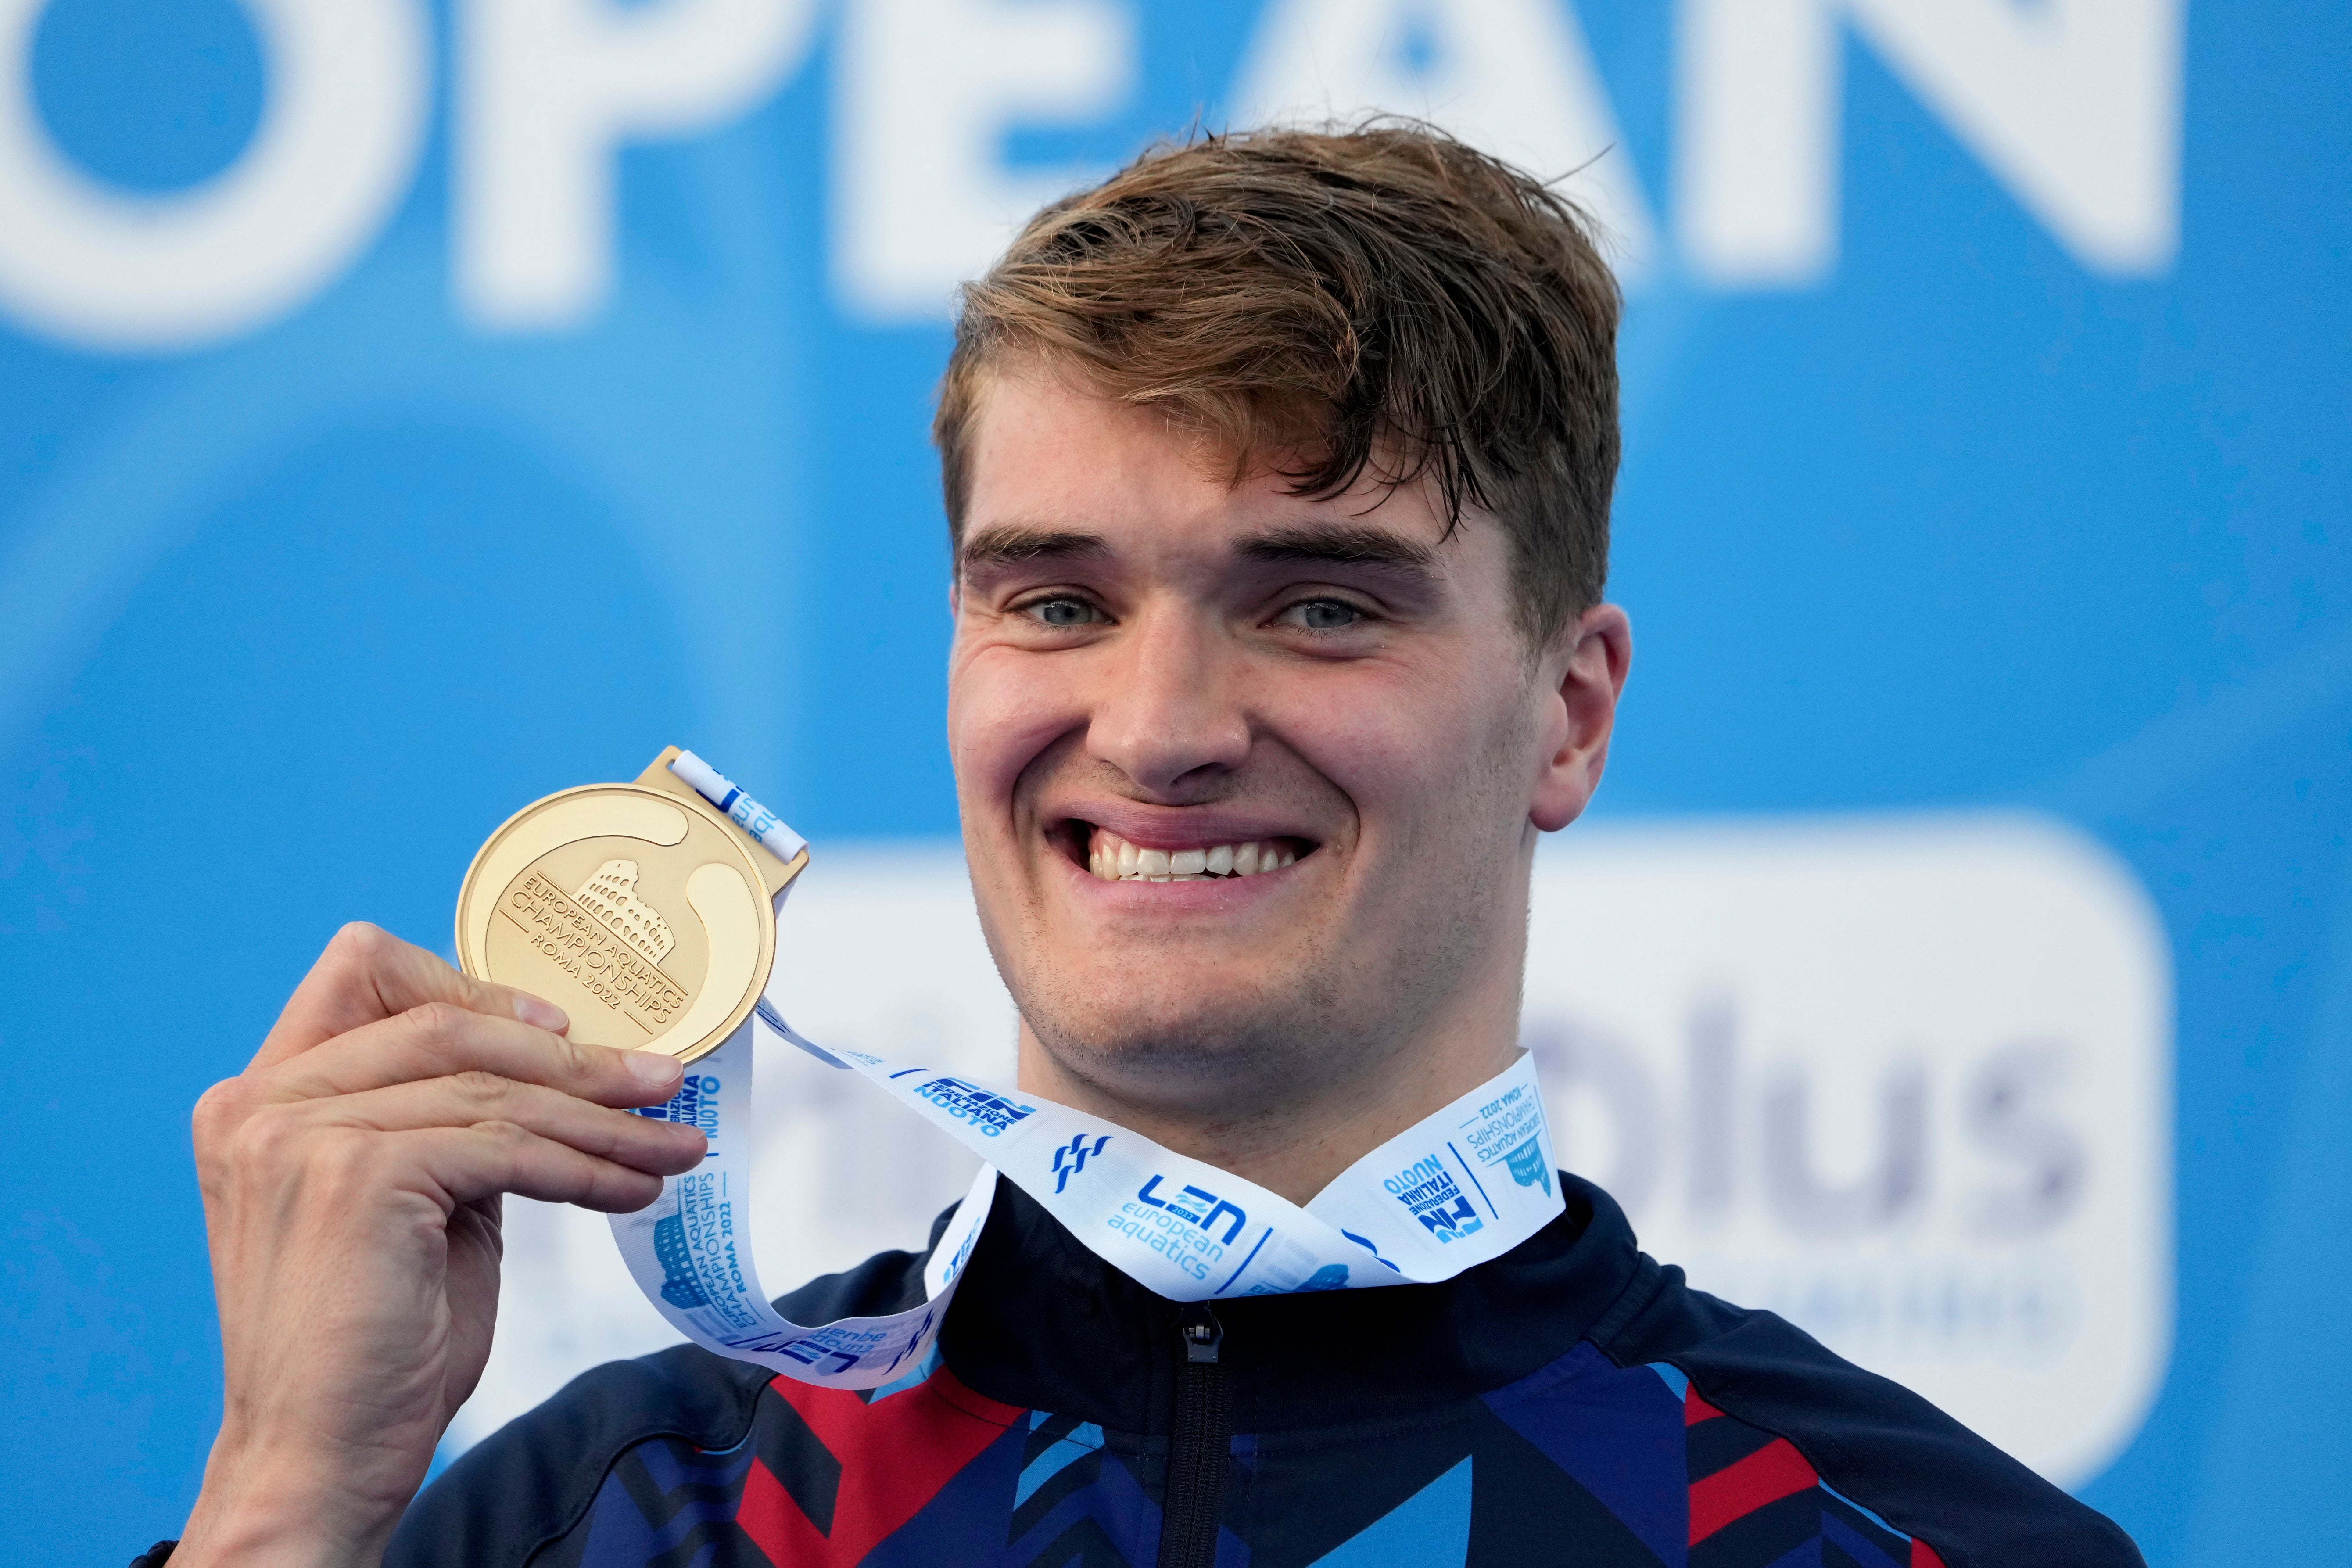 Great Britain’s James Wilby celebrates on the podium after winning gold in the men’s 200m breaststroke at the European Swimming Championships in Rome (Gregorio Borgia/AP)